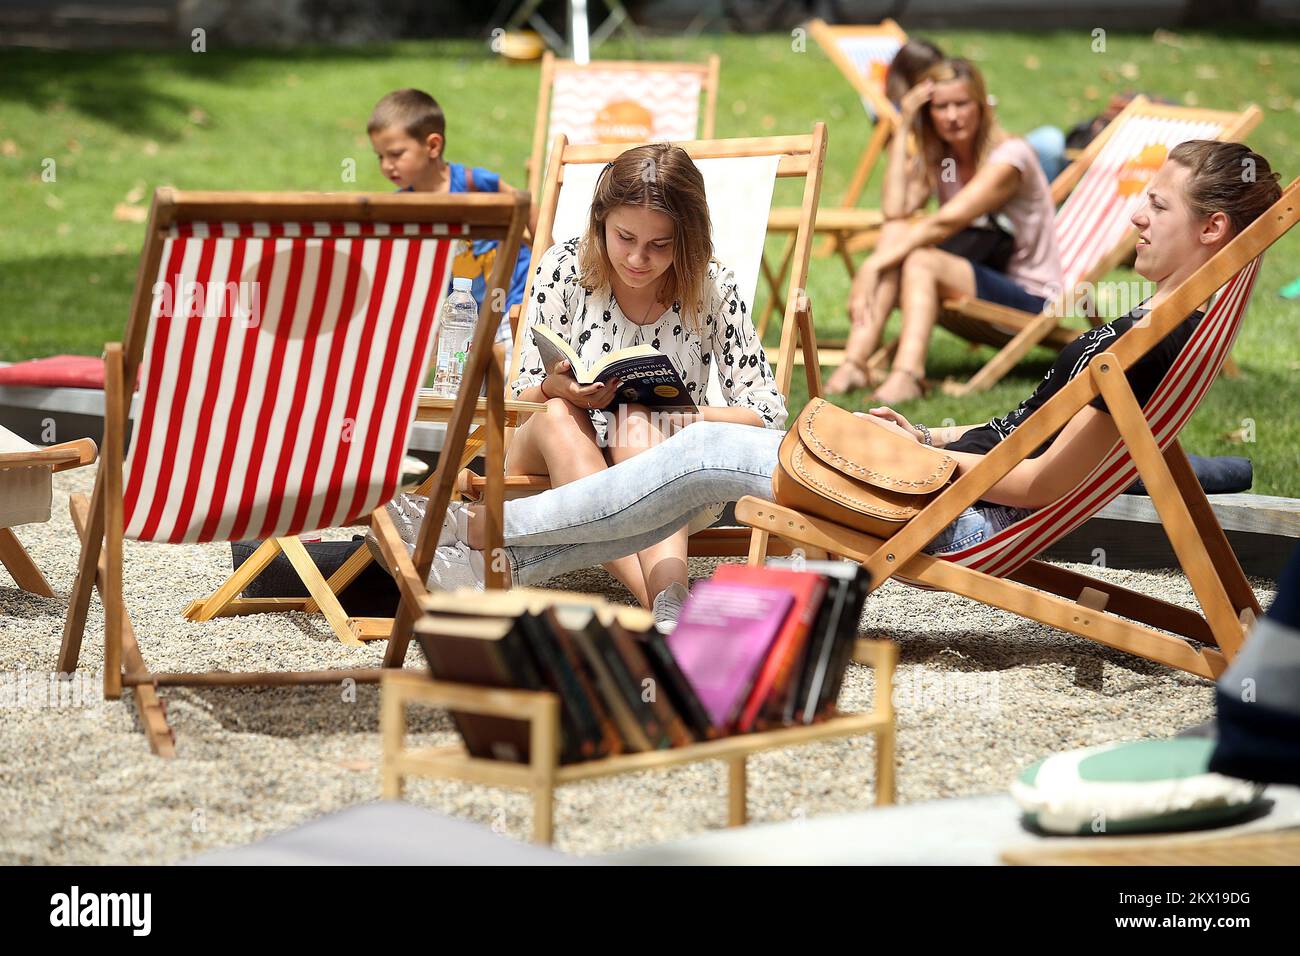 03.07.2017., Zagreb, Croatia - For the third year in a row, Lumen publishing house is organising a book fair that turns Zagreb's Zrinjevac Park into an oasis for bookworms and future booklovers. The park is covered with sand, there is parasols and deck chairs so that the visitors can read more than 200 free books in the shade, as well as purchase some of them at a discounted price. Visitors can cool down with one of the cocktails, inspired by book titles you can find at Lumen's beach. Photo: Goran Stanzl/PIXSELL Stock Photo